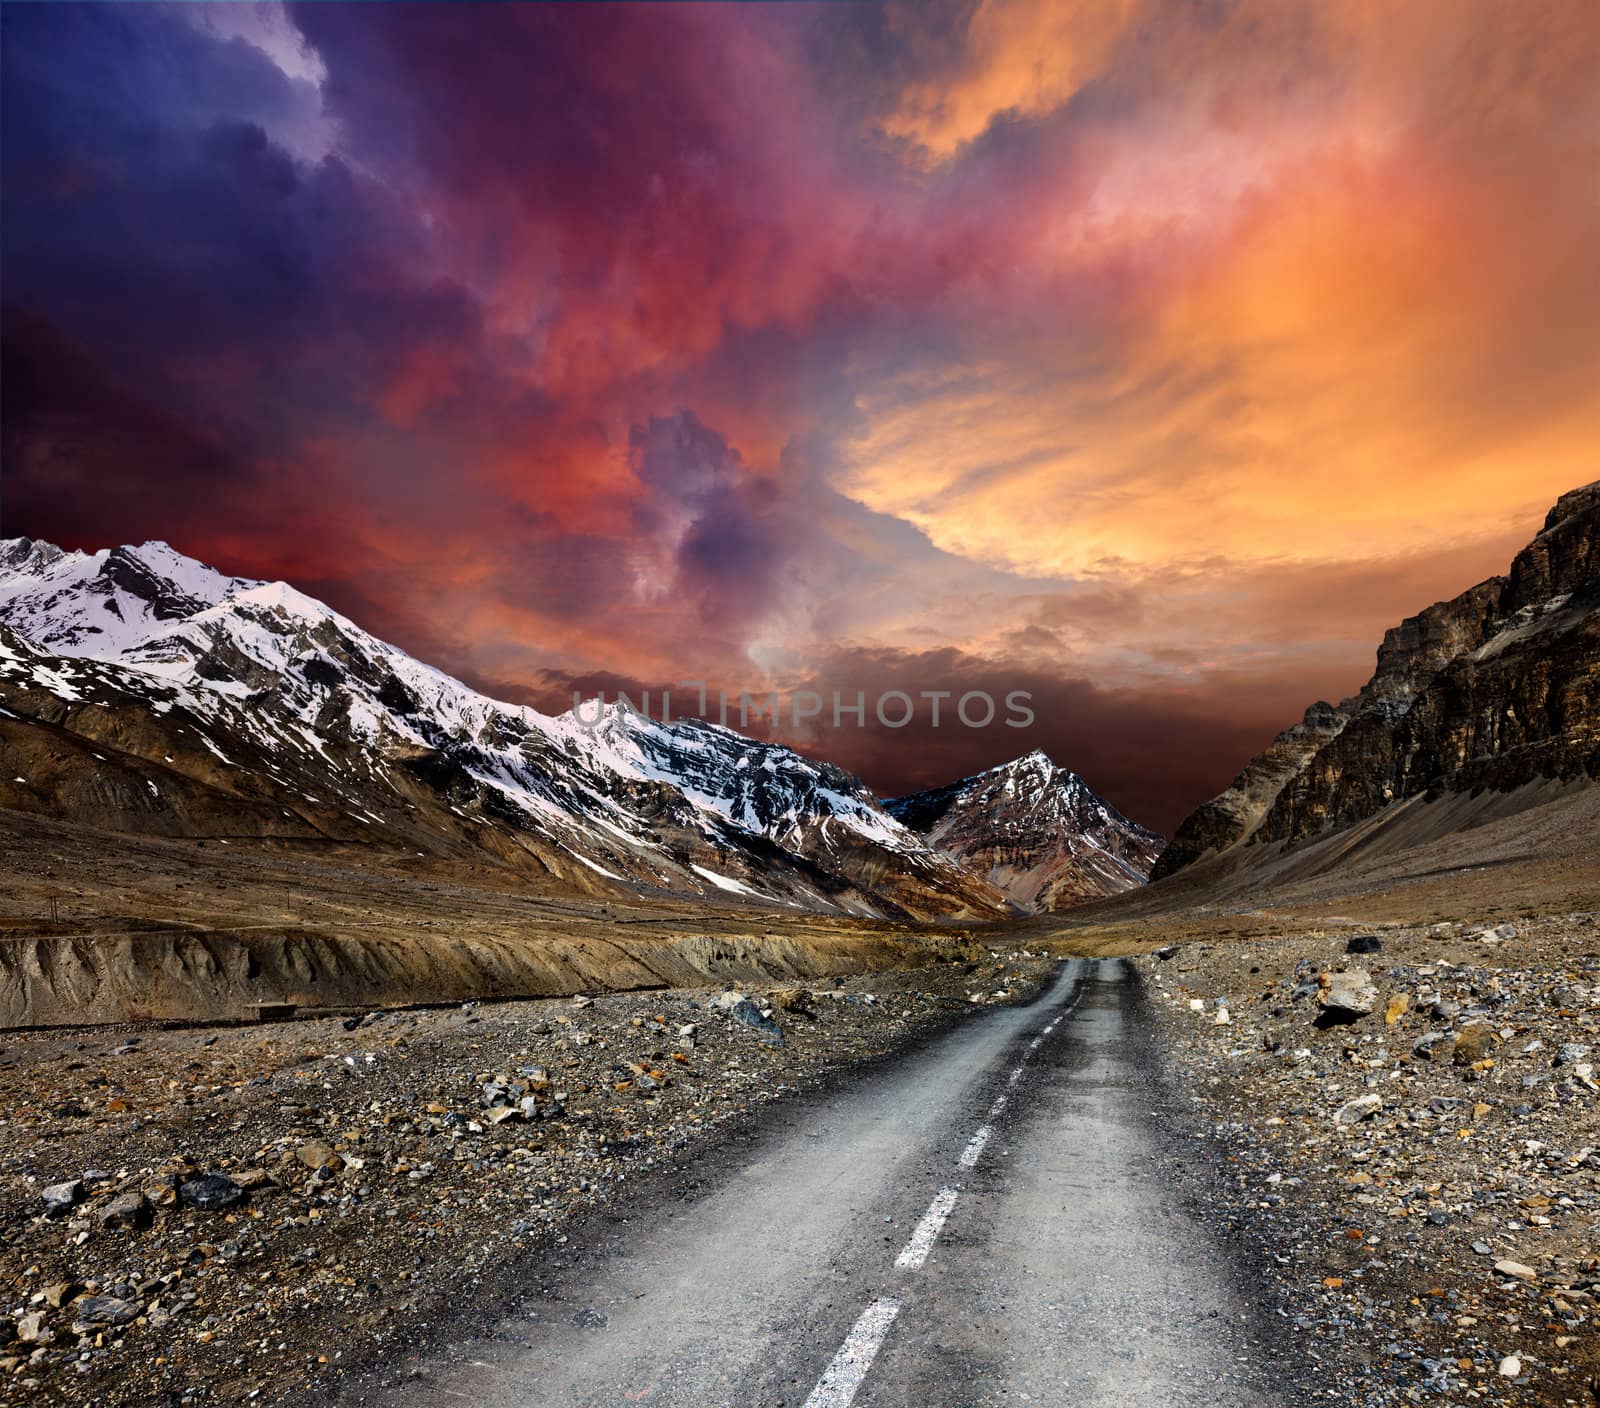 Road in mountains by dimol